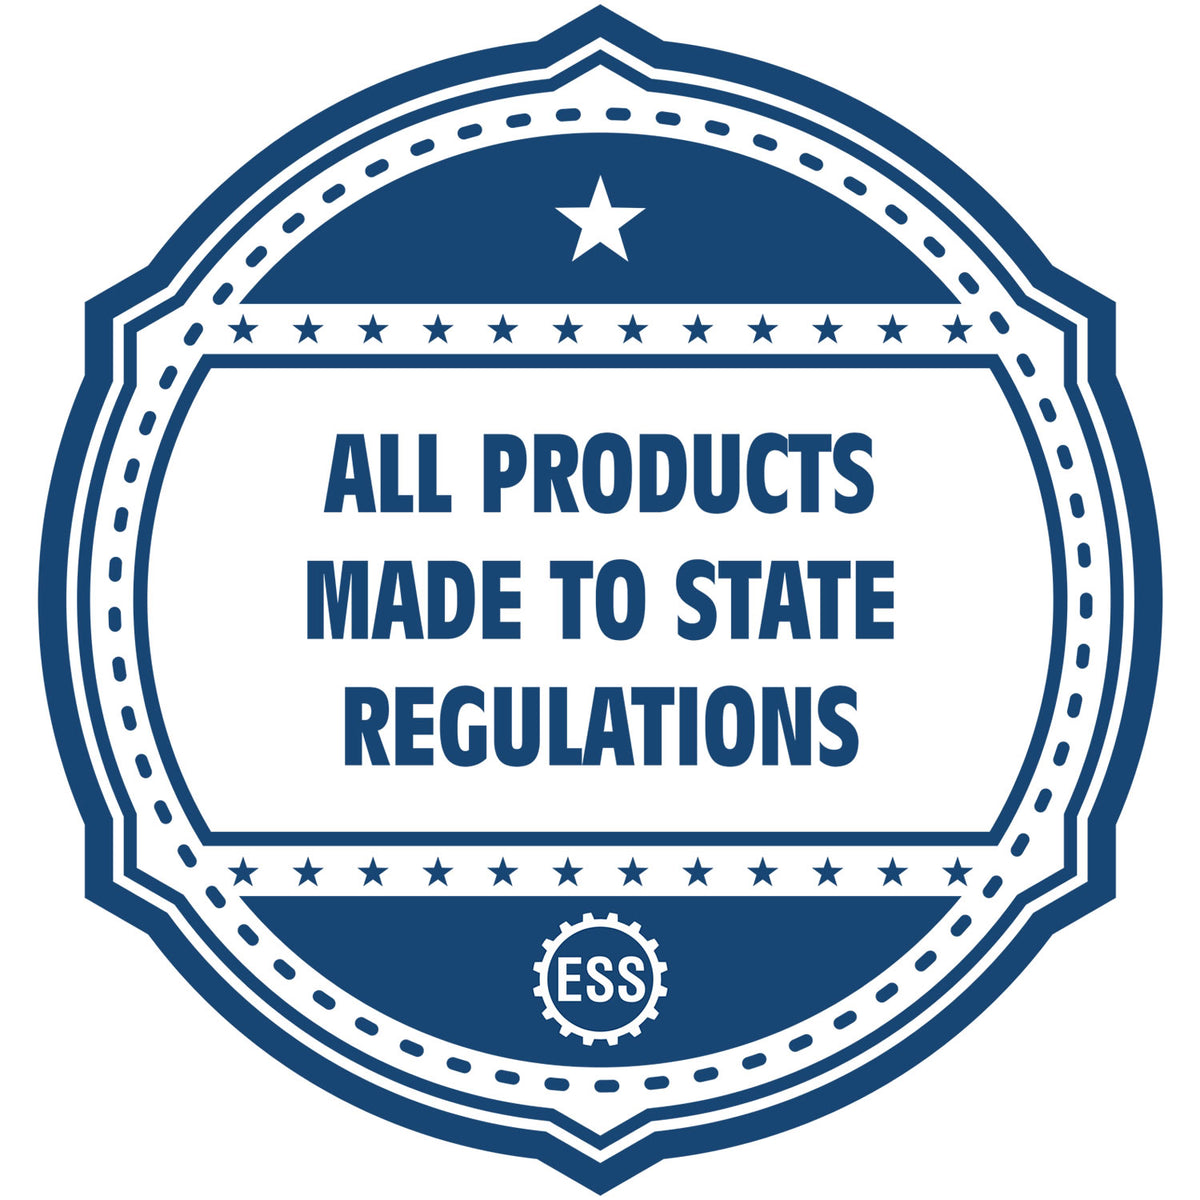 An icon or badge element for the PSI Maryland Notary Stamp showing that this product is made in compliance with state regulations.